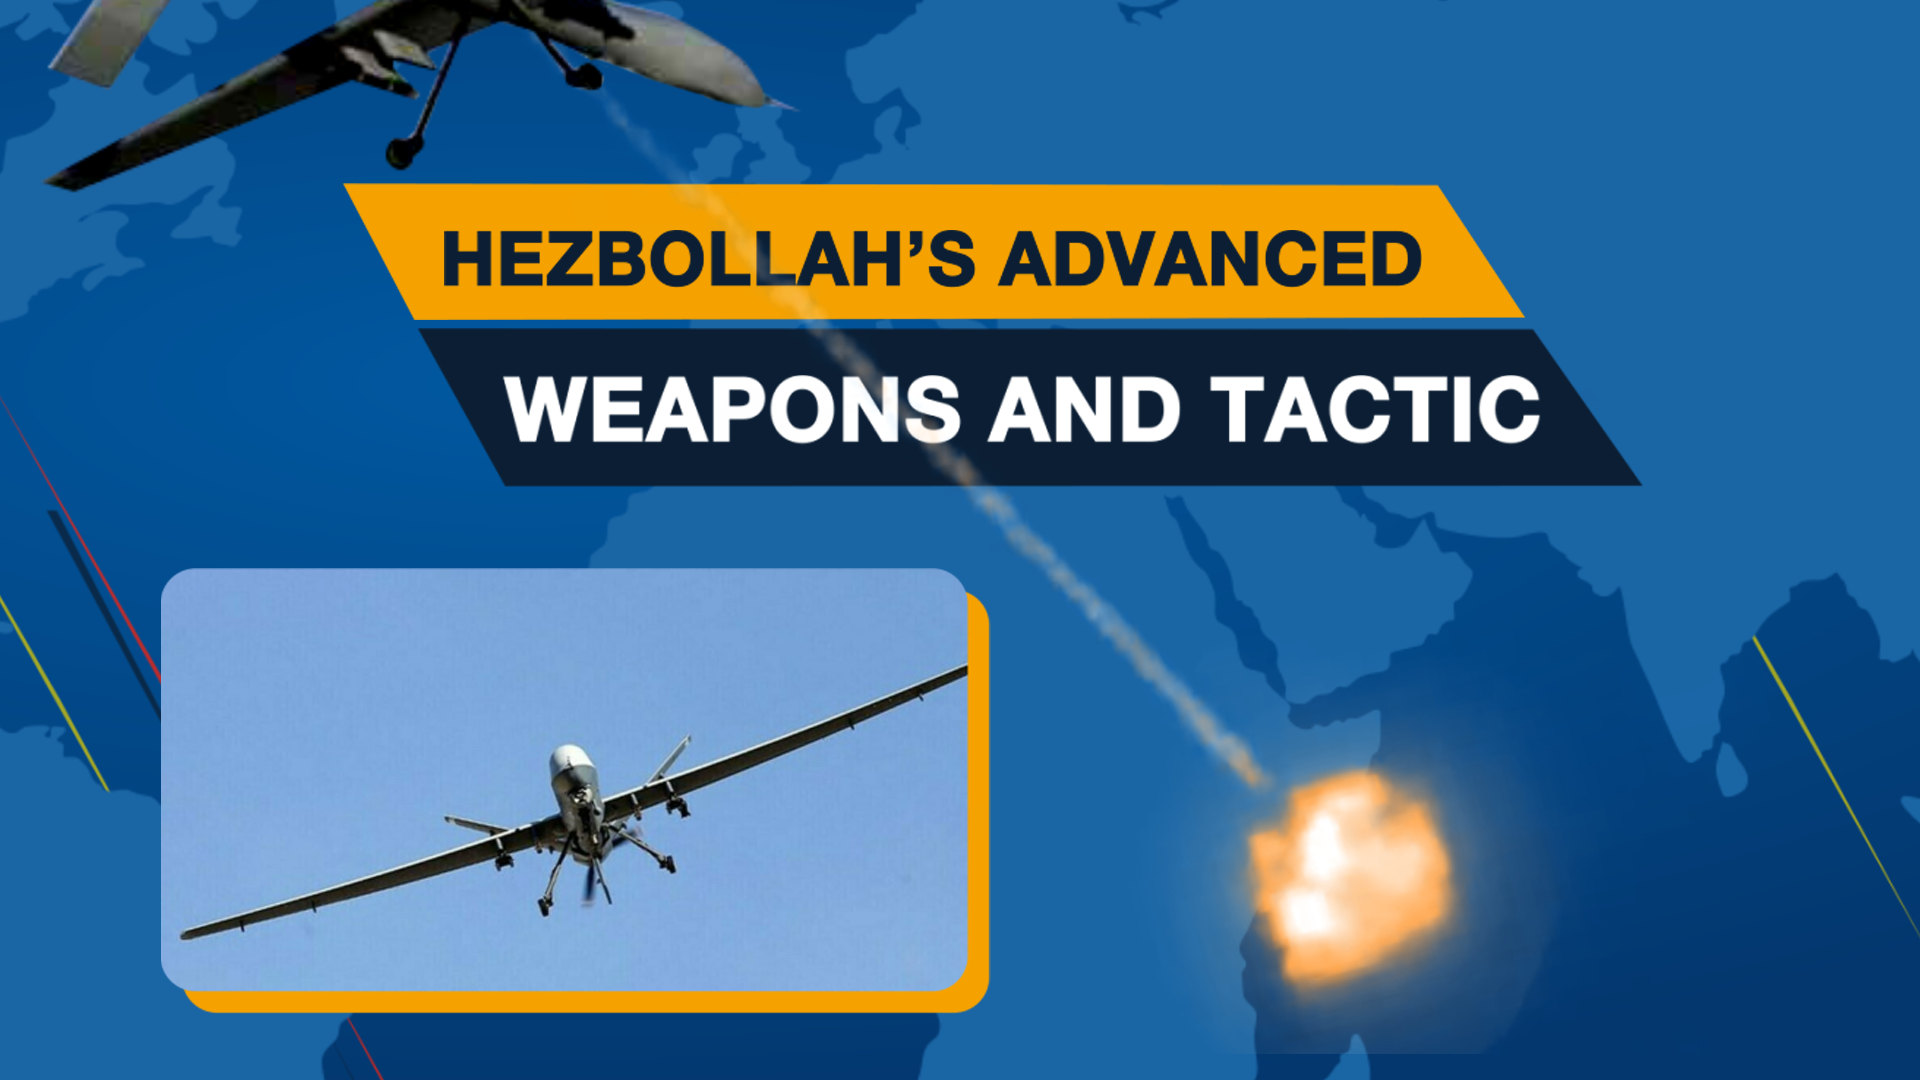 Hezbollah's advanced weapons and tactic